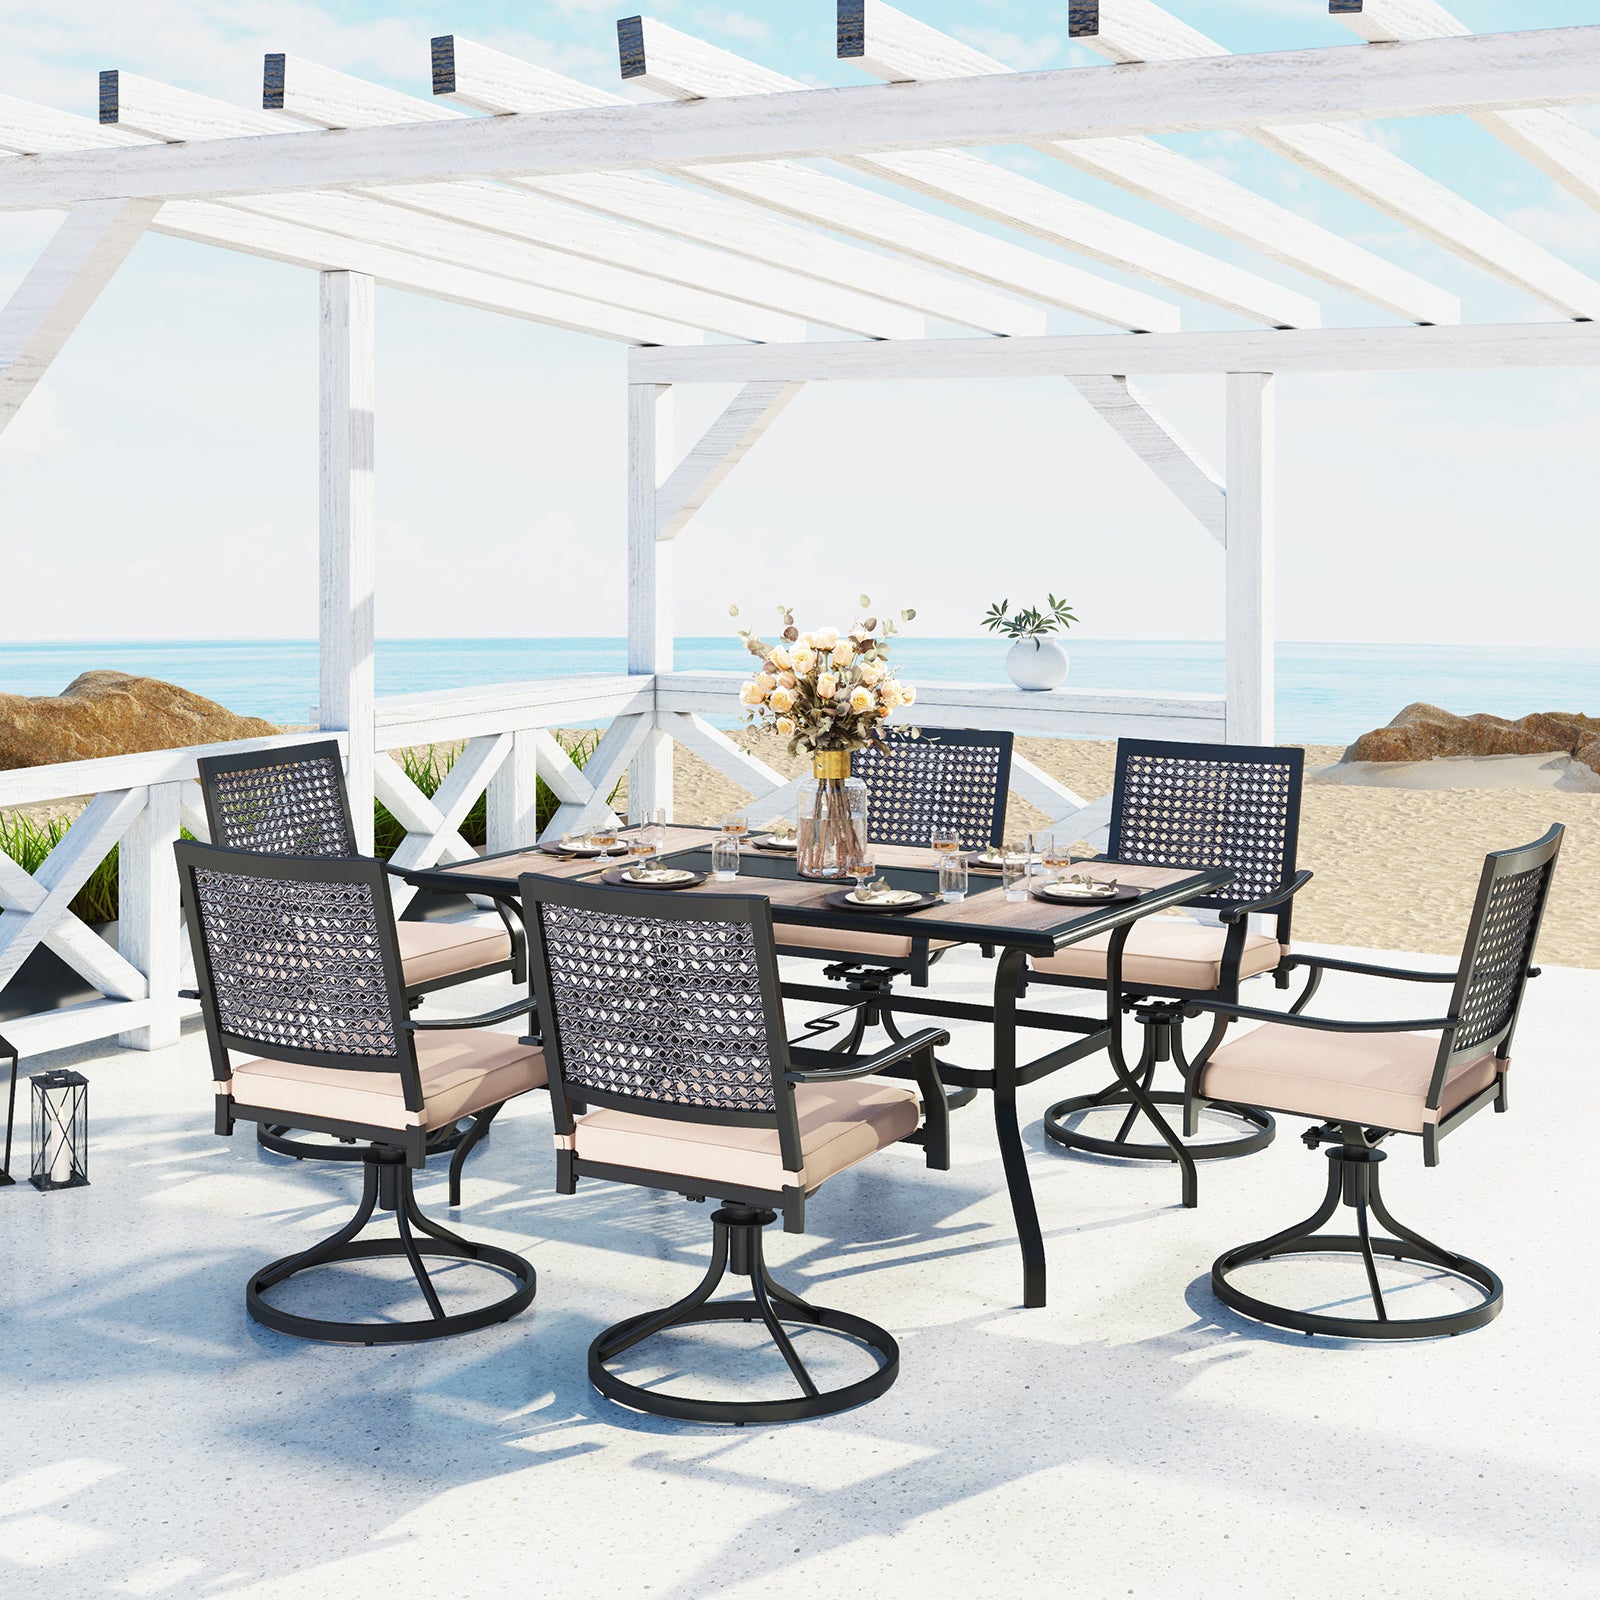 MFSTUDIO 7-Piece Outdoor Dining Set Geometric Rectangle Table & Bull's Eye Pattern Dining Chairs